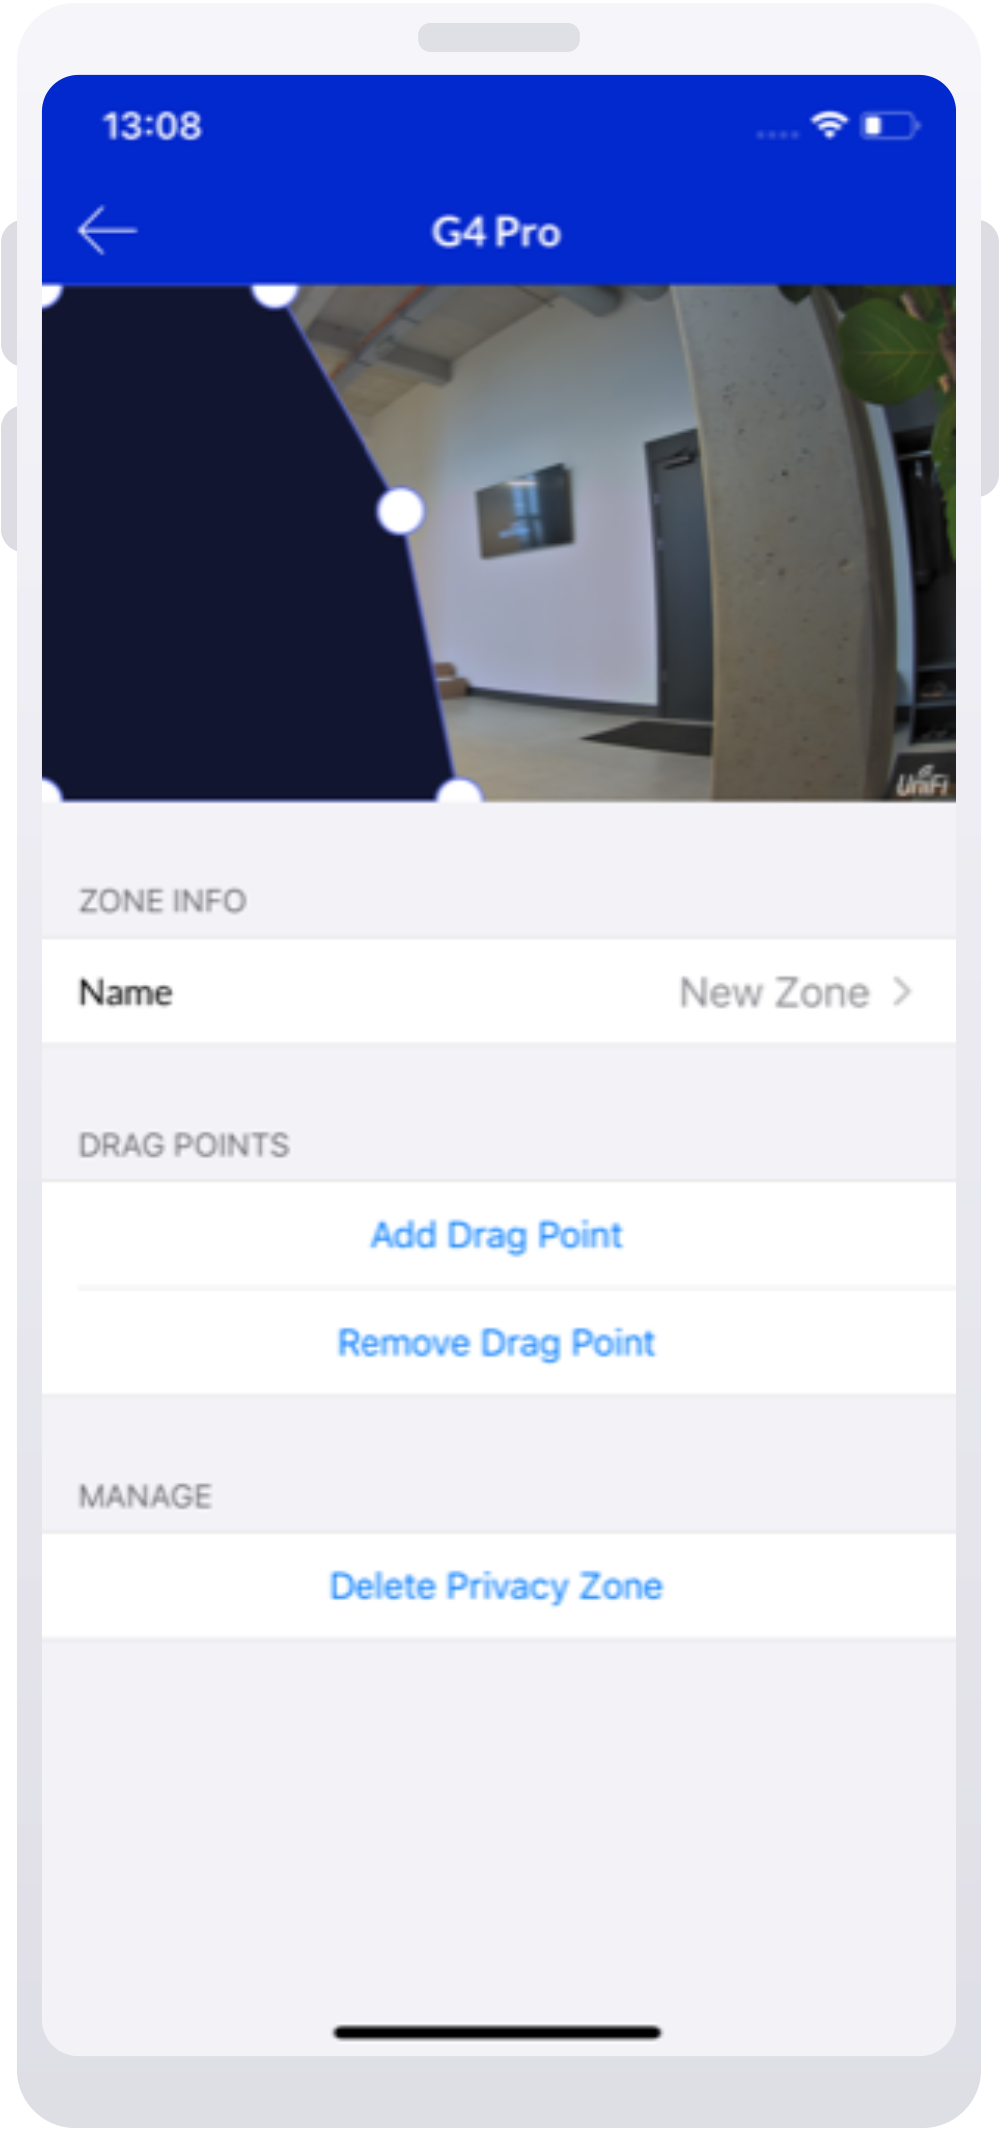 unifi-protect-privacy-zone-mobile-app-frame.png